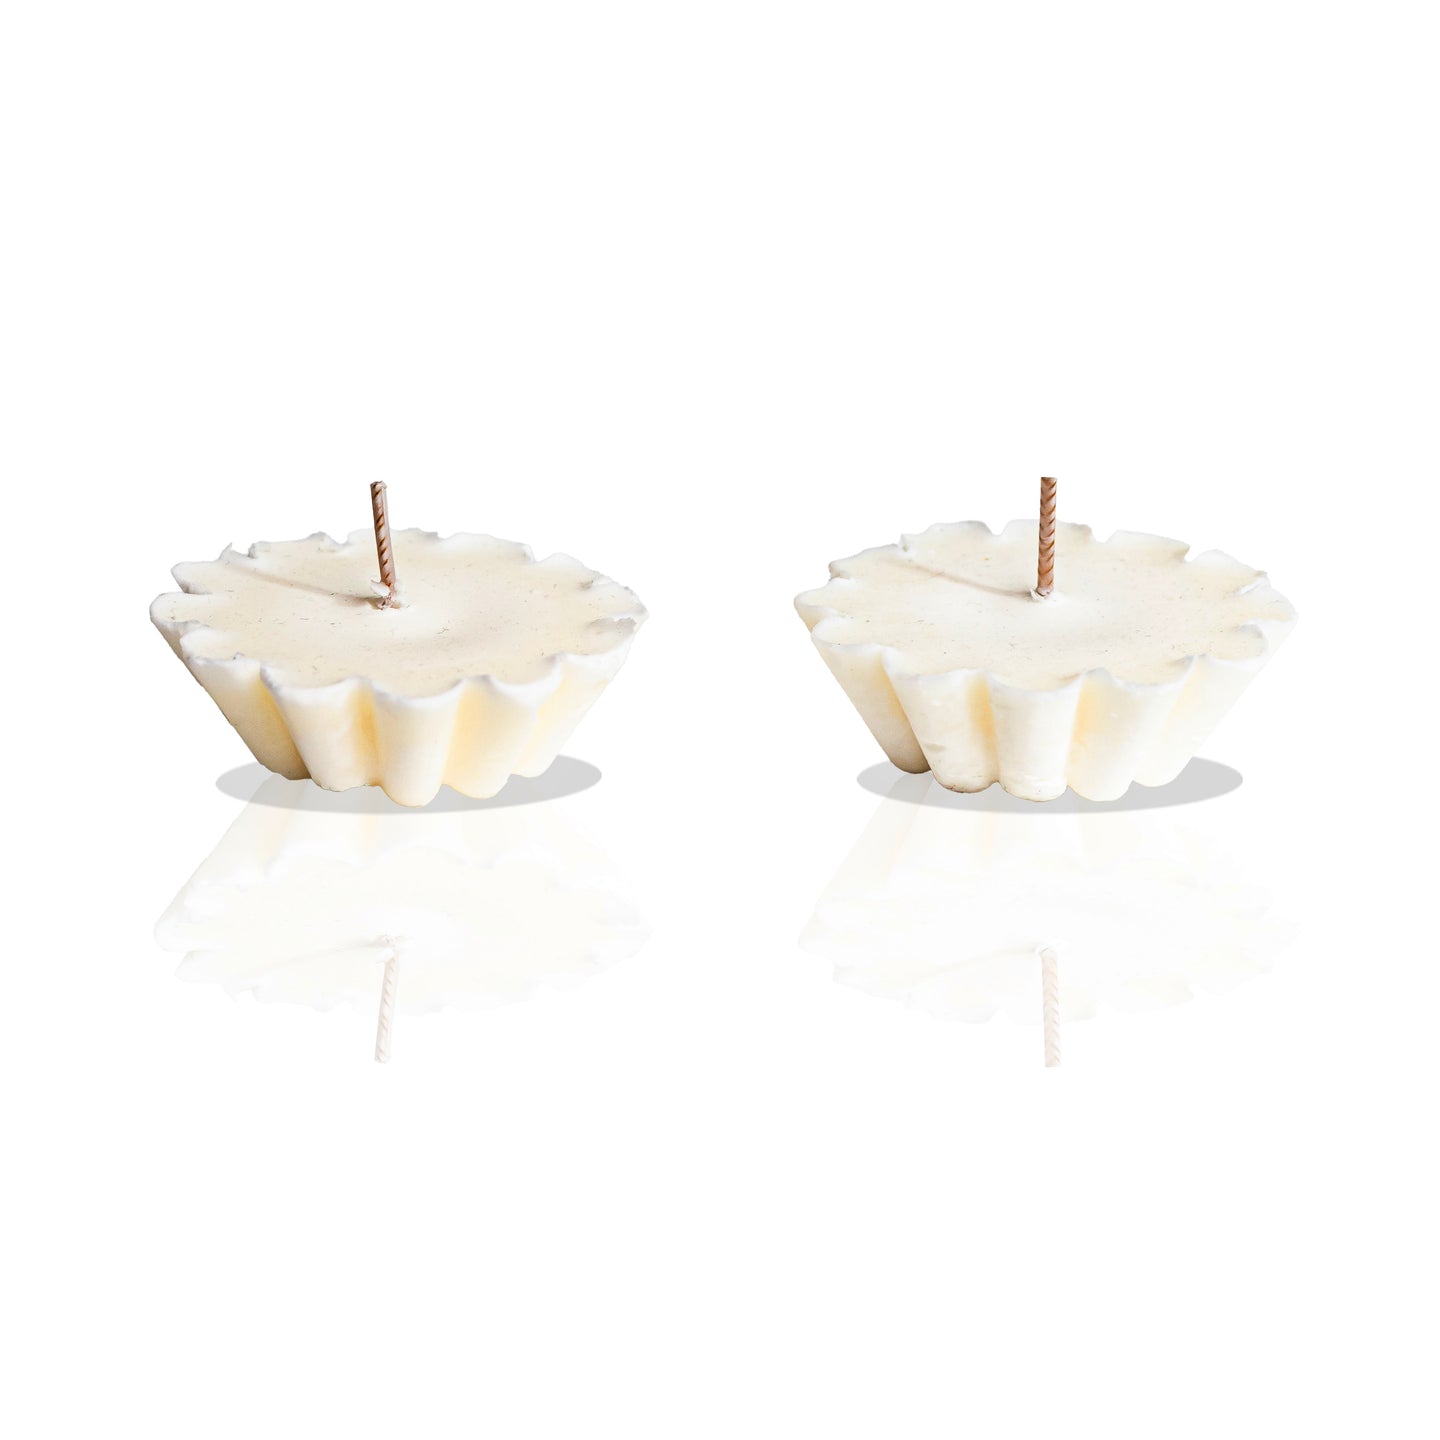 Floating Non-GMO Coconut Wax Candles